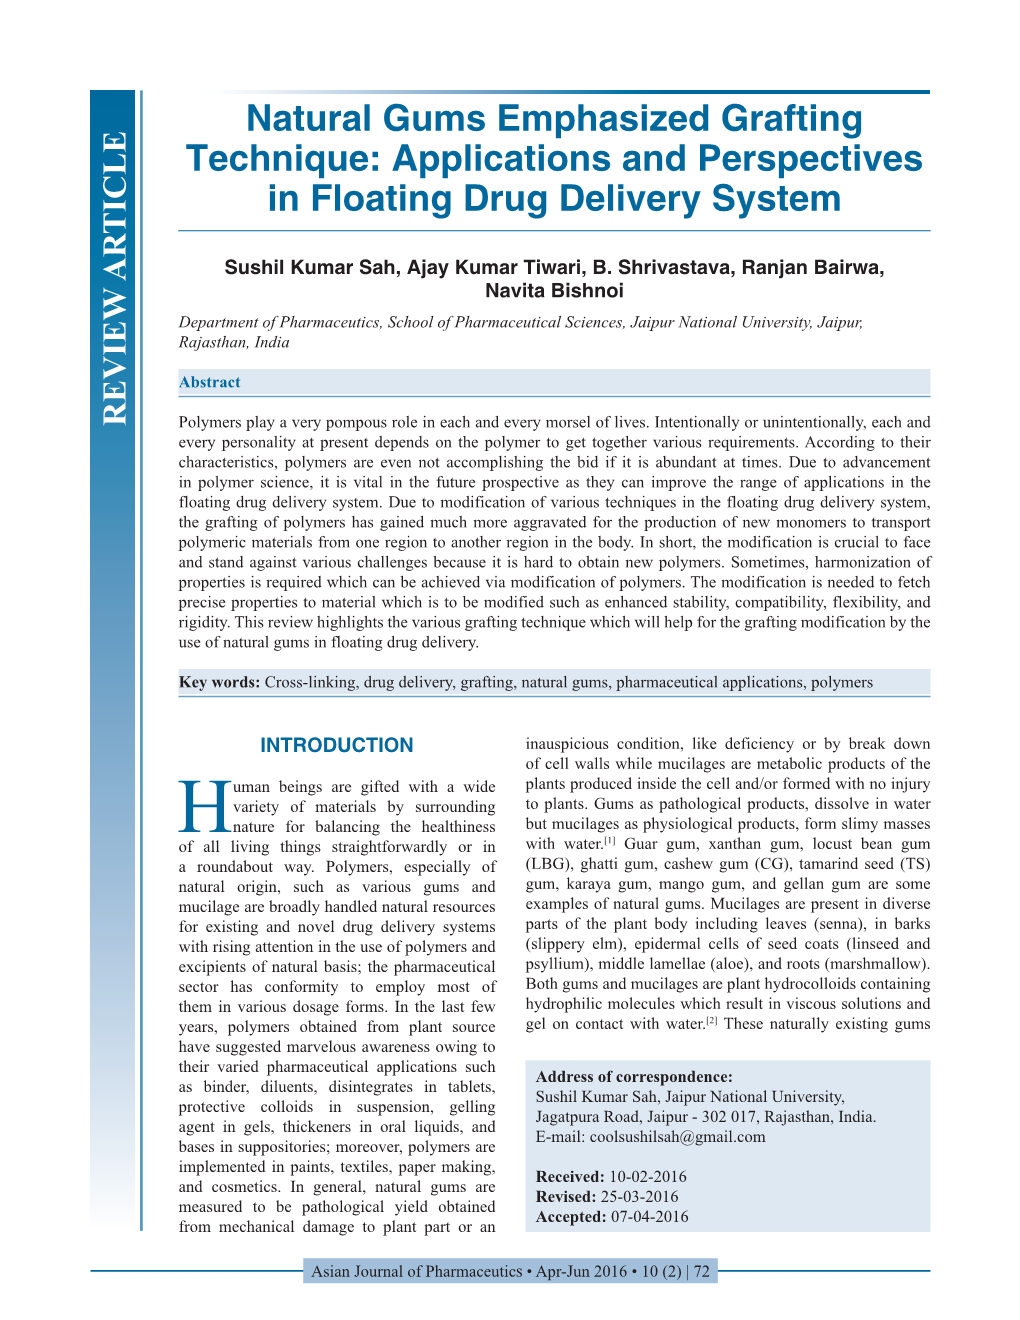 Natural Gums Emphasized Grafting Technique: Applications and Perspectives in Floating Drug Delivery System